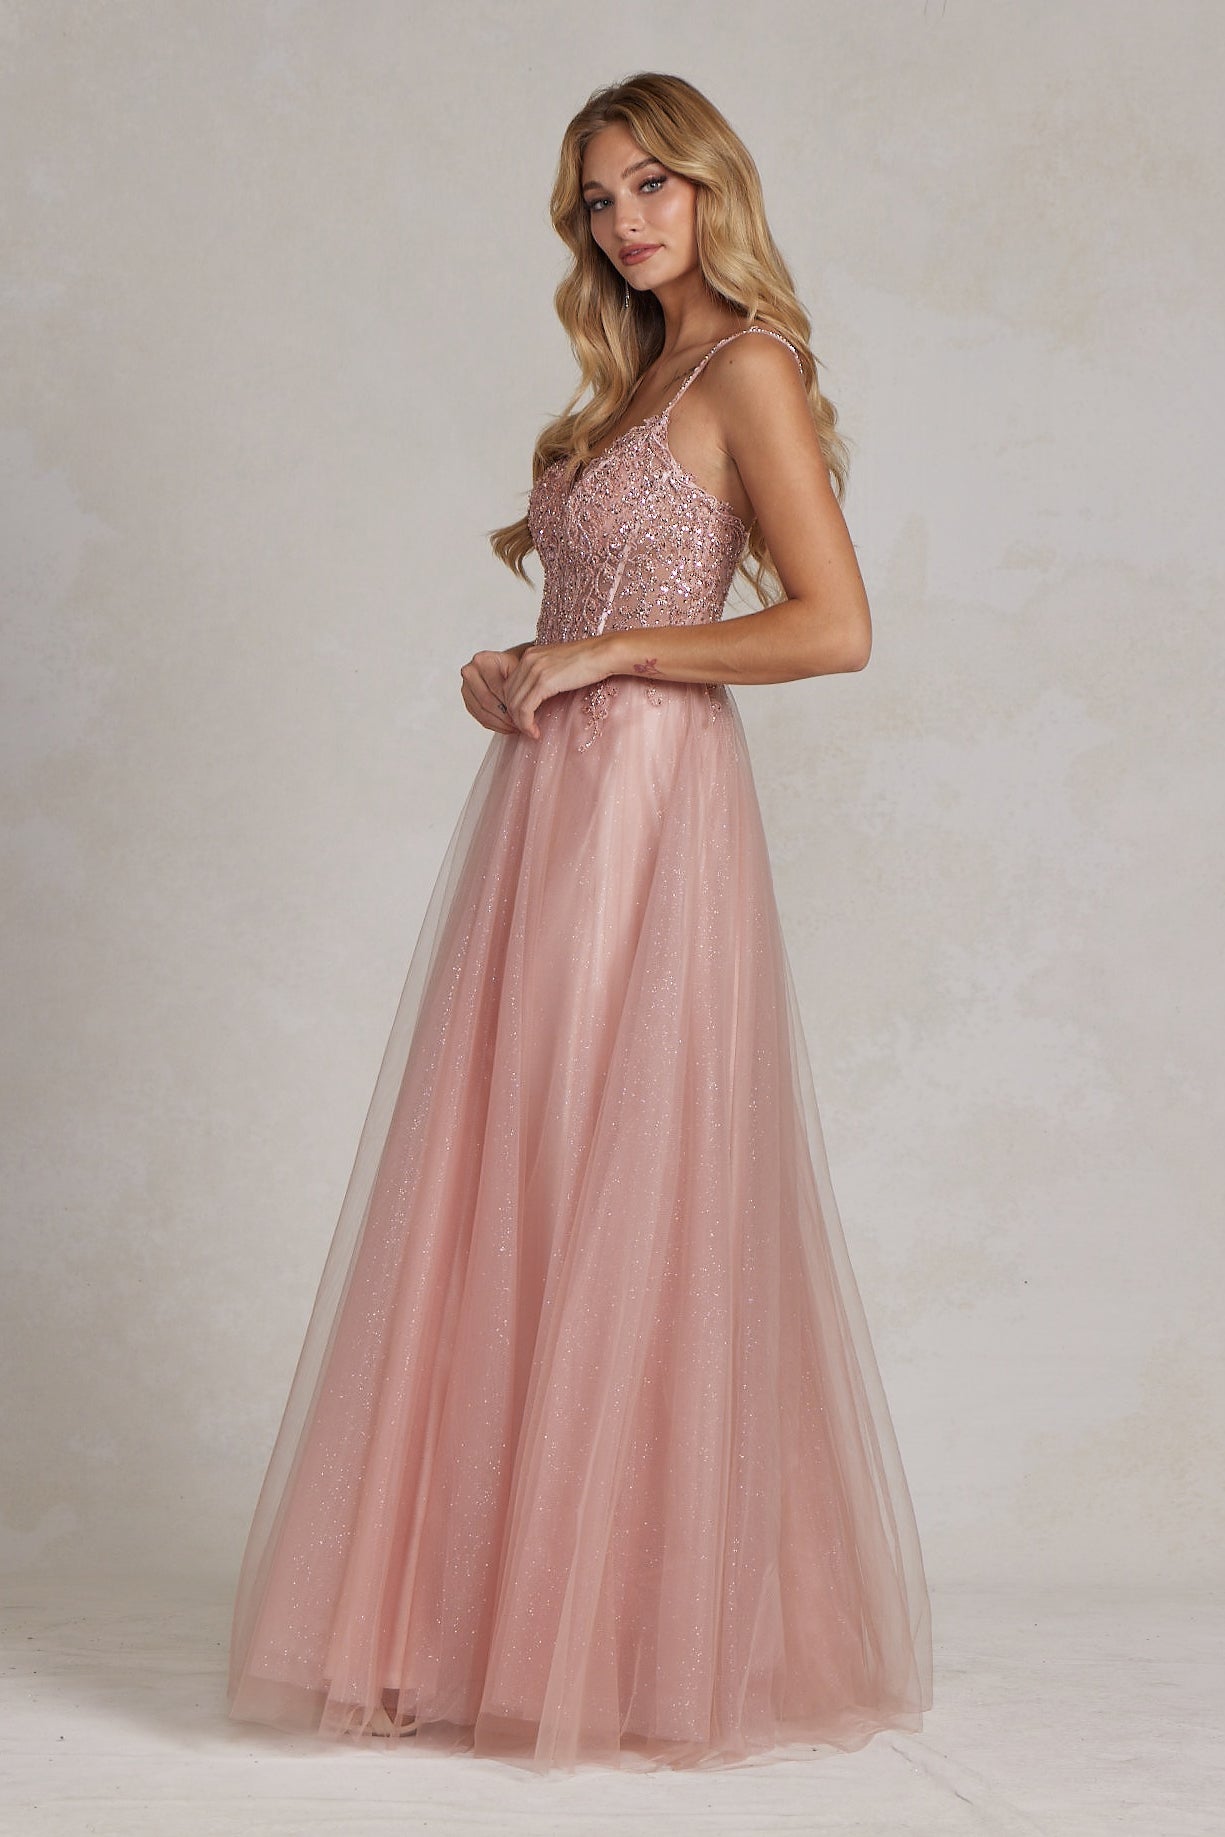 Embroidered Beads Tulle Skirt Open Back Long Prom Dress NXF1086 Elsy Style Prom Dress